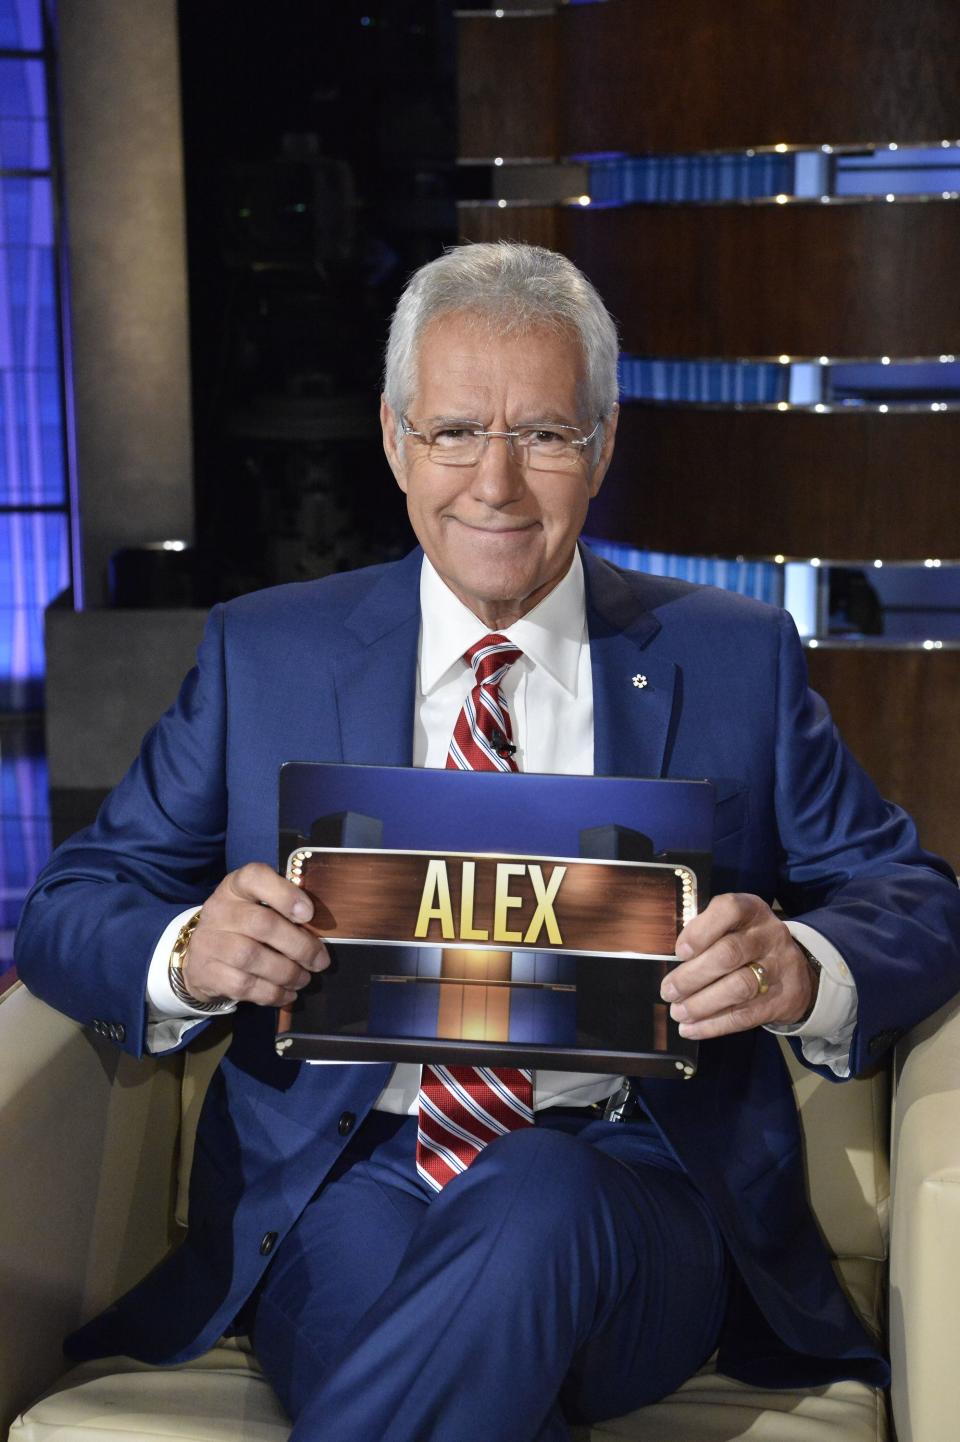 12 Times Alex Trebek Proved He Was the Greatest Gameshow Host of All Time